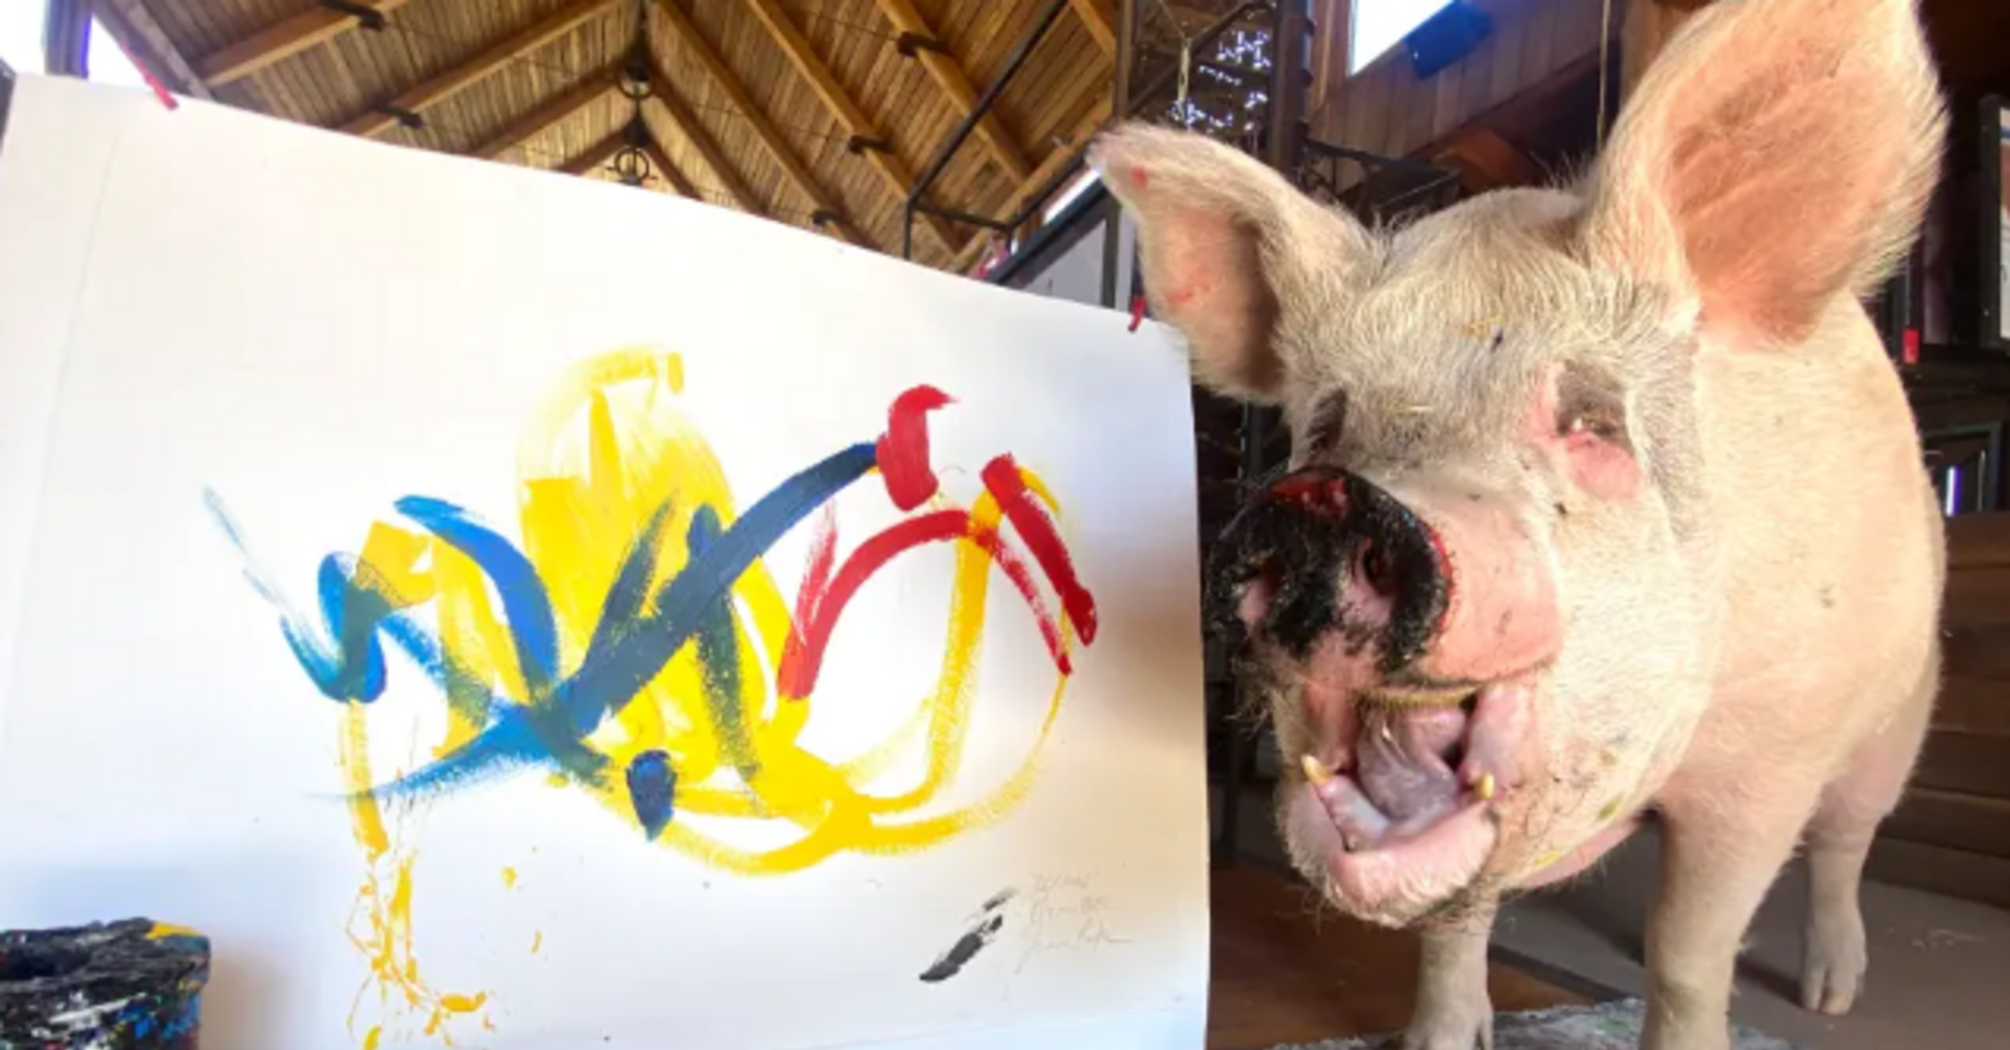 The famous pig-artist Pigcasso died